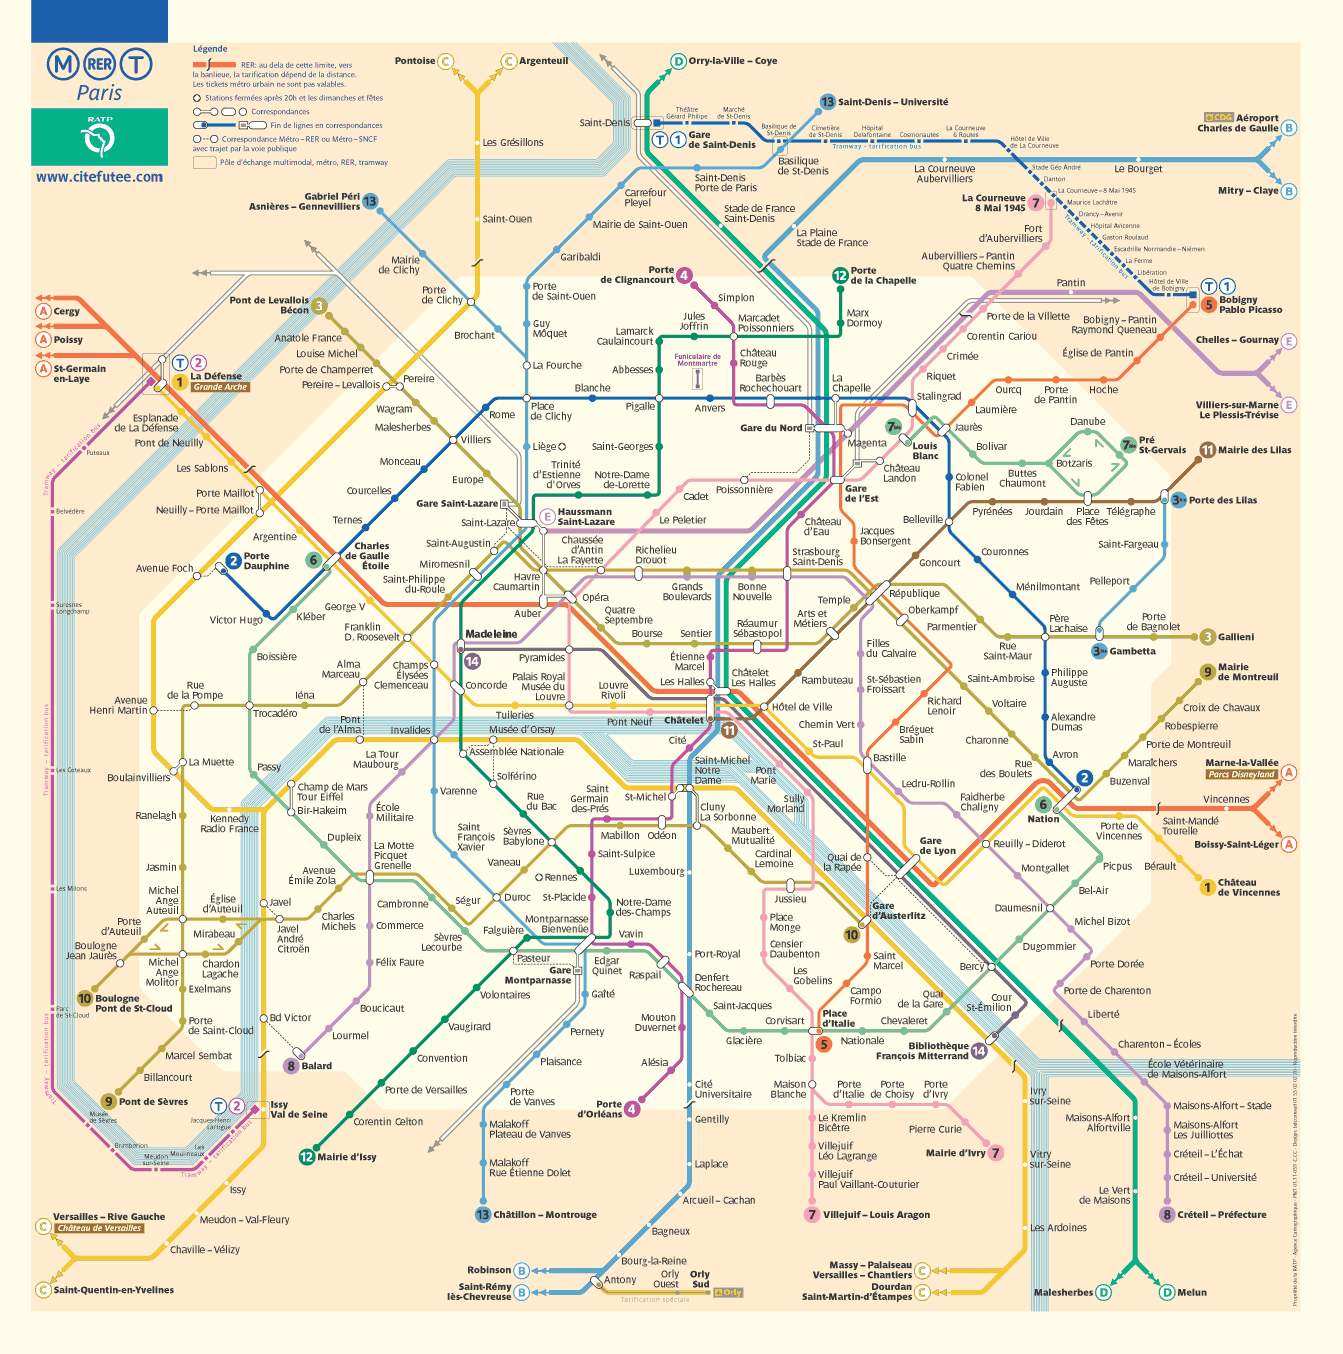 metro map of paris from ratp with all the stations and the direction in paris to go to the marias nad saint-germain des pres, to visit the left bank anf the historical places, to find an apartment for rent in paris.